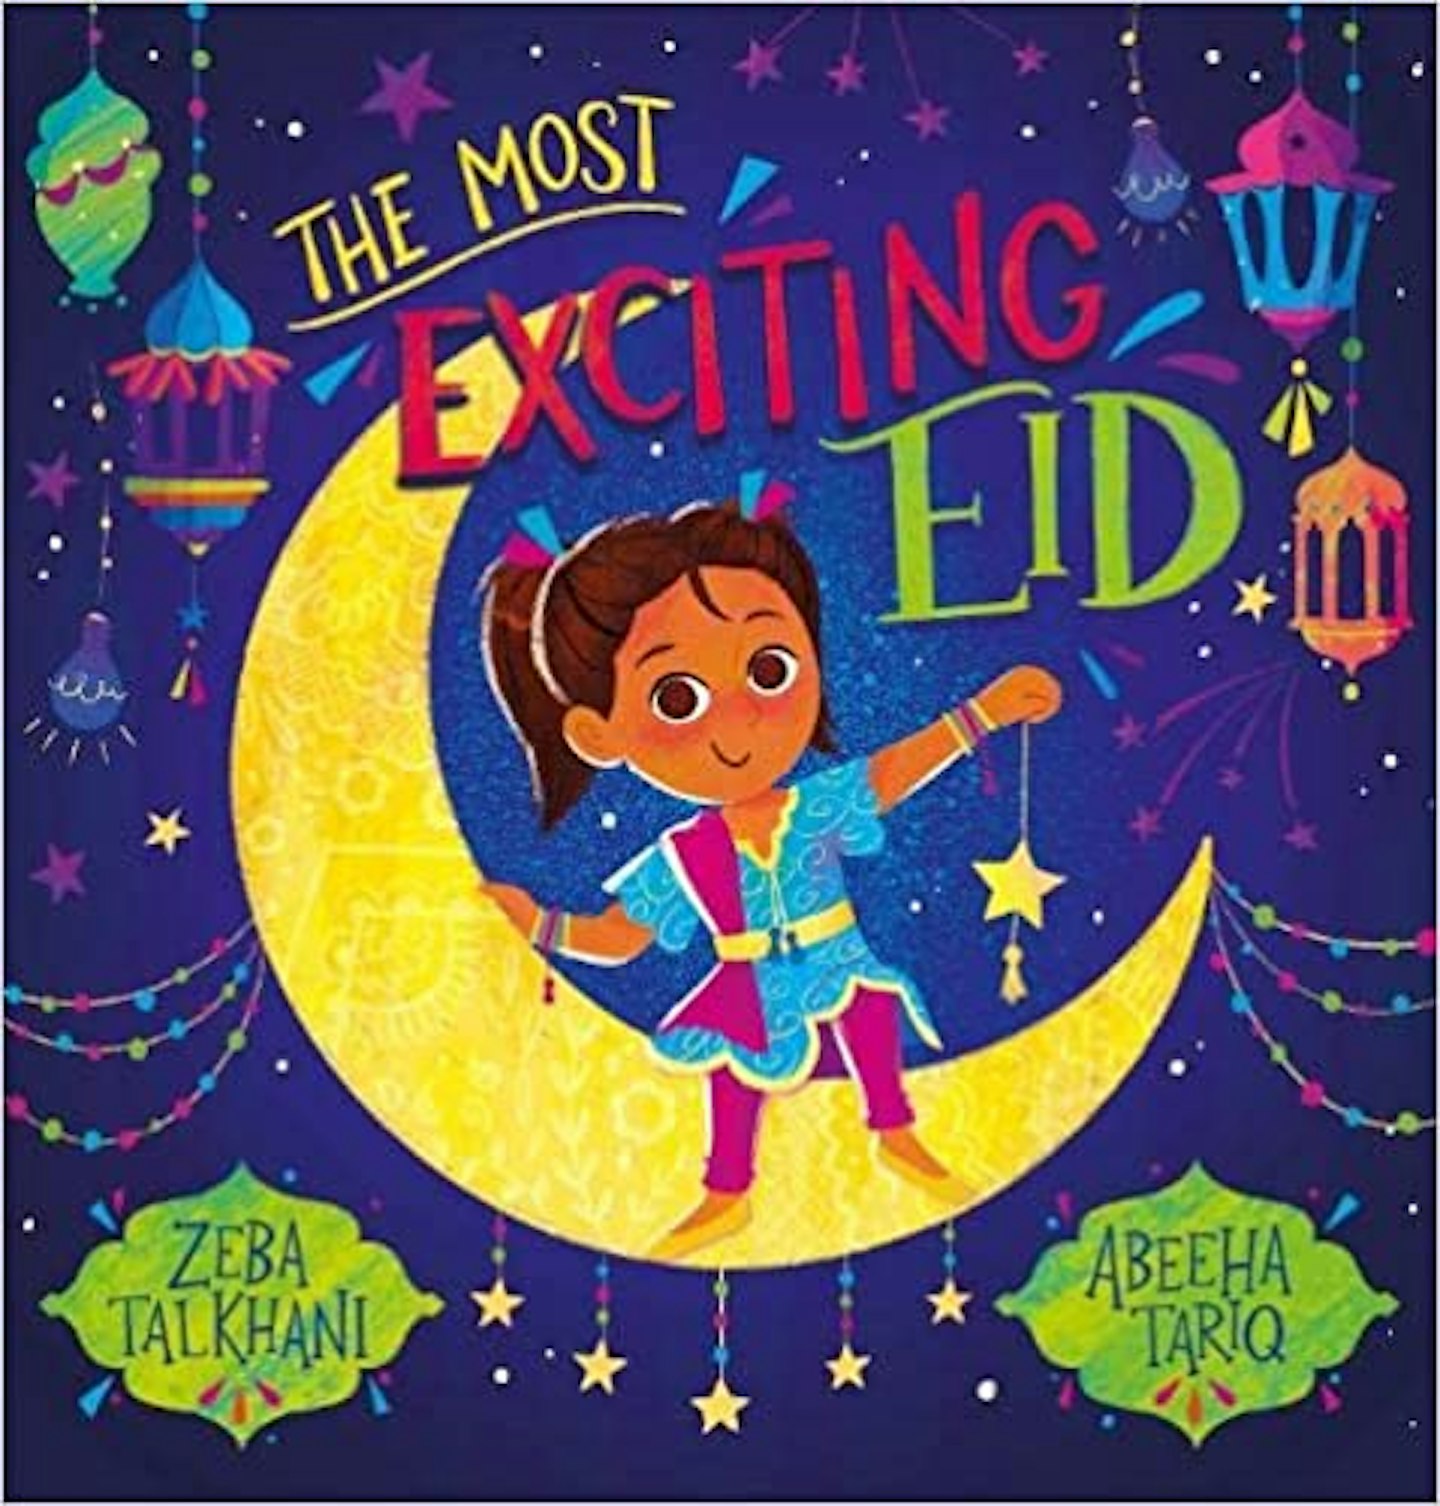 The Most Exciting Eid by Zeba Talkhani